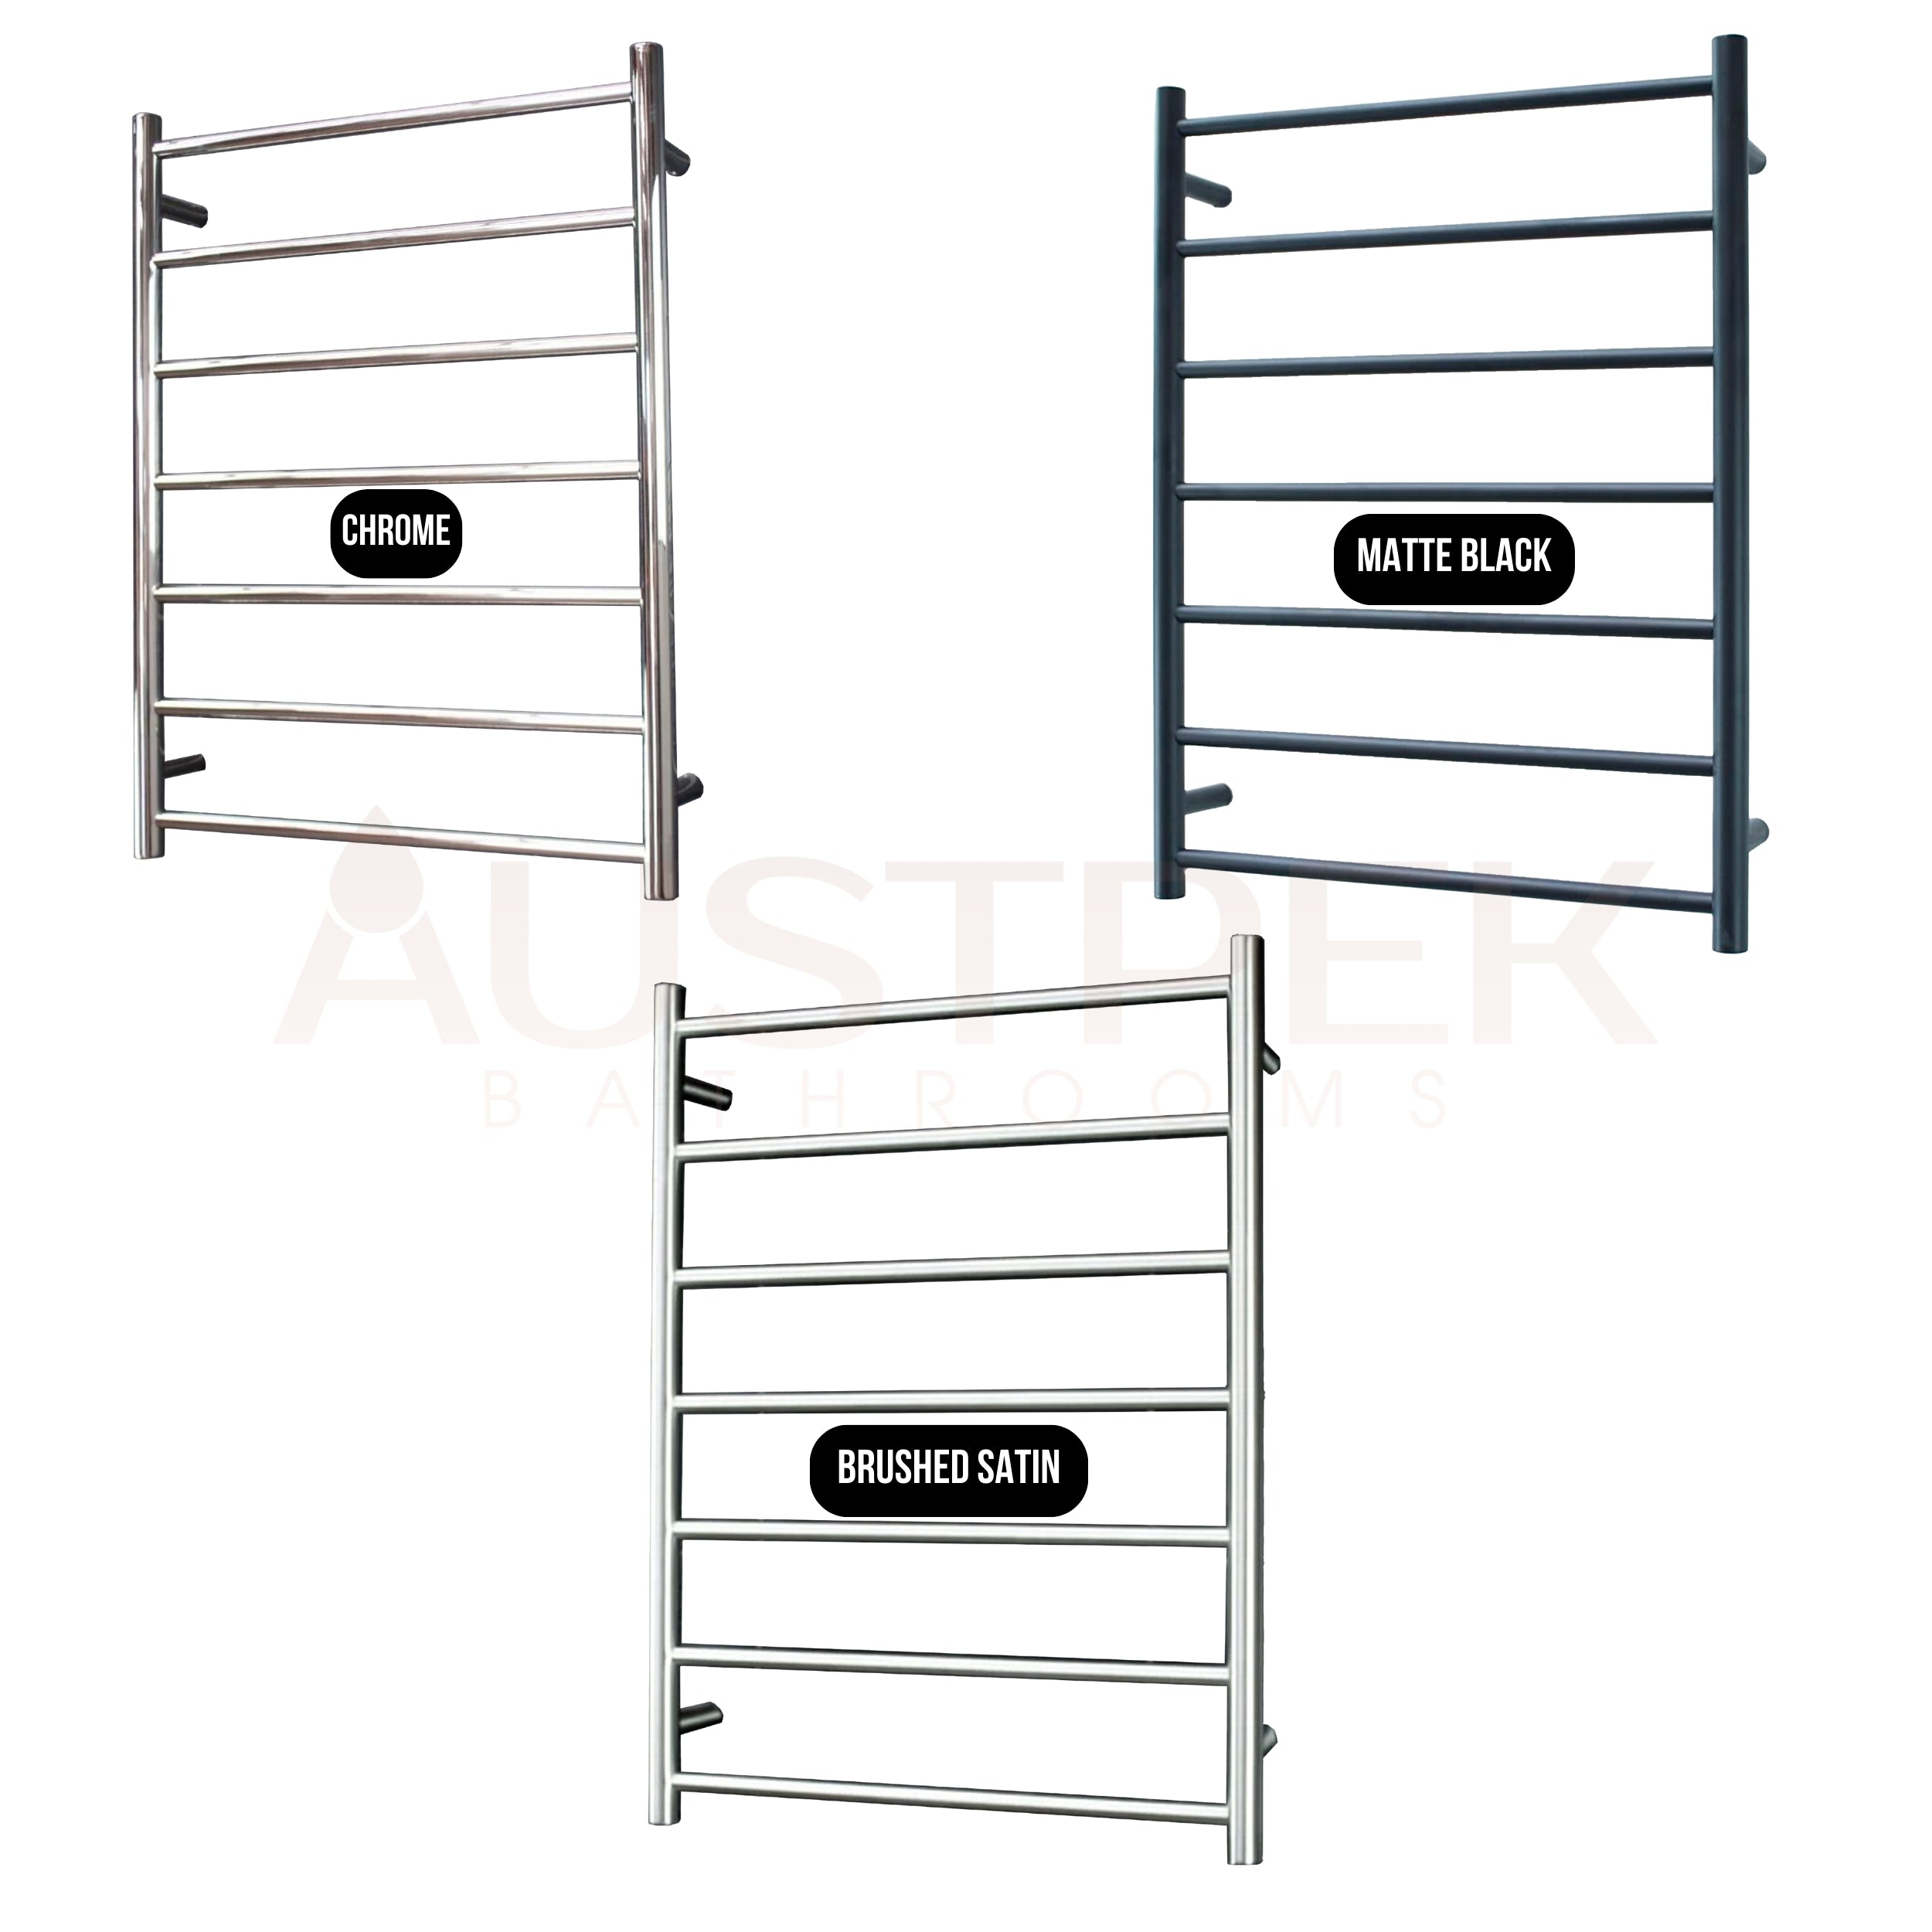 RADIANT HEATING 7-BARS ROUND HEATED TOWEL RAIL LOW VOLTAGE BRUSHED SATIN 600MM